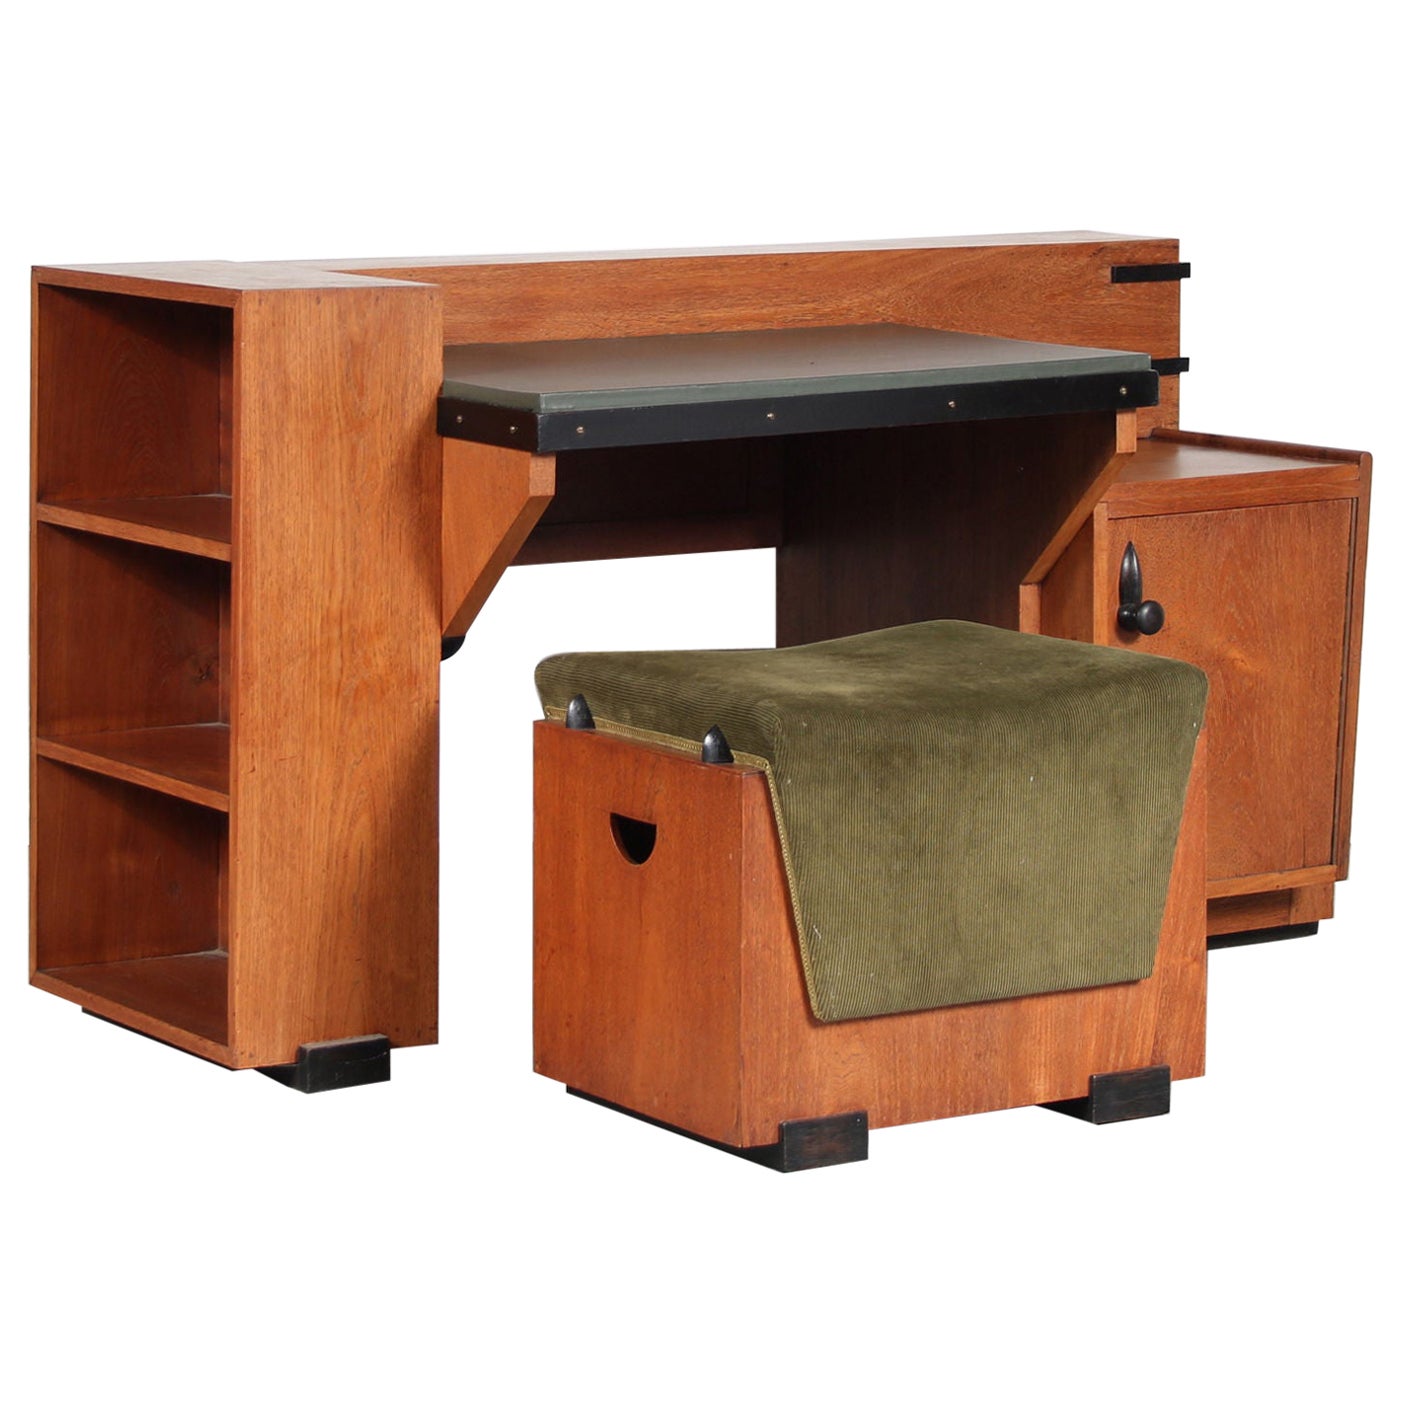 Colonial Haagse School Desk with Stool, Indonesia, 1930